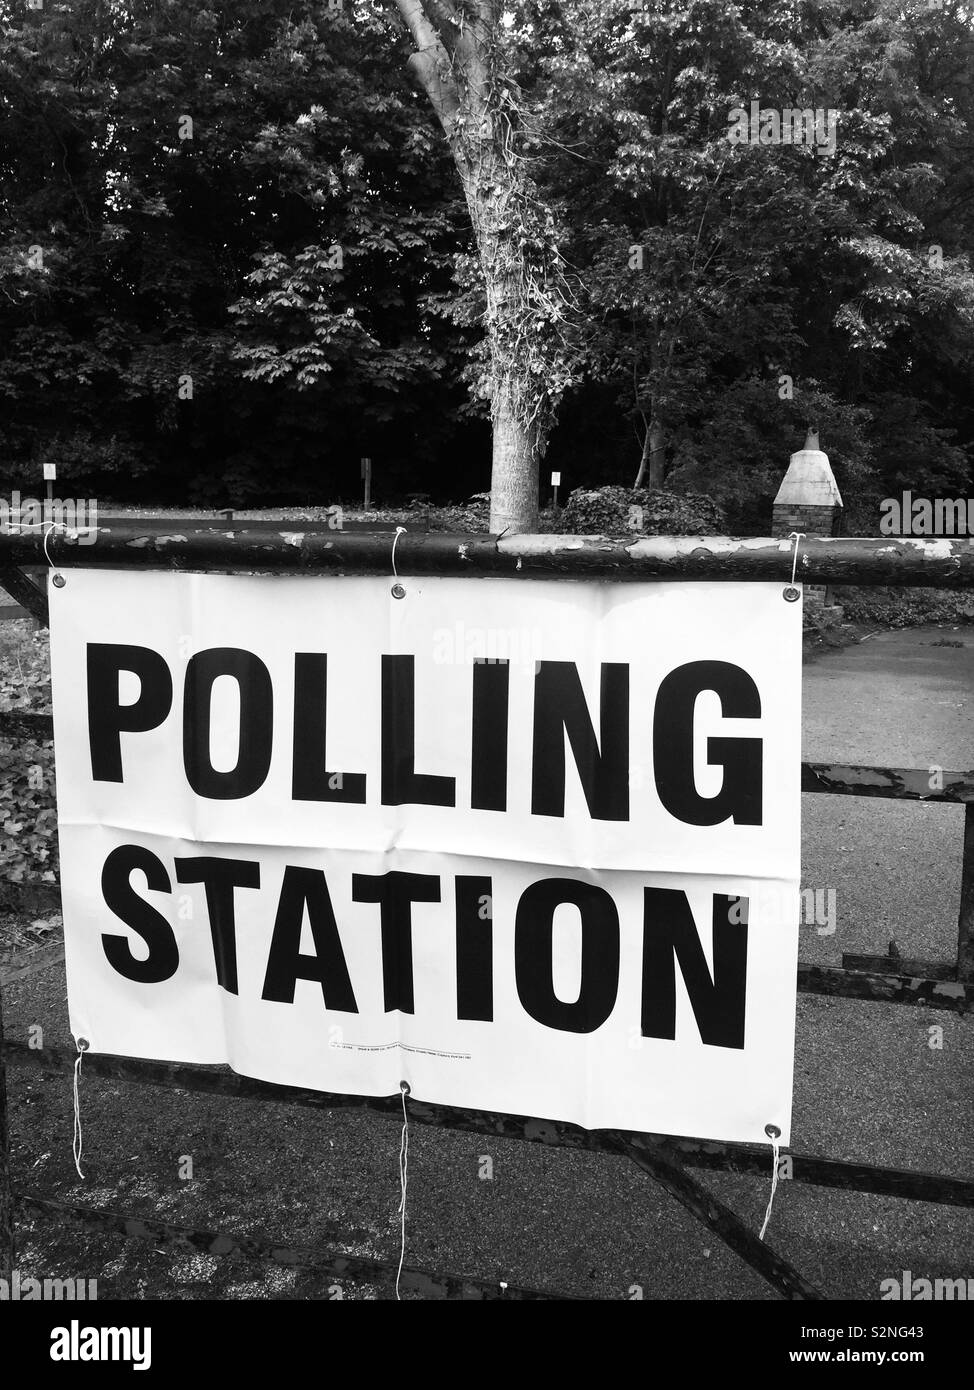 Polling station Stock Photo